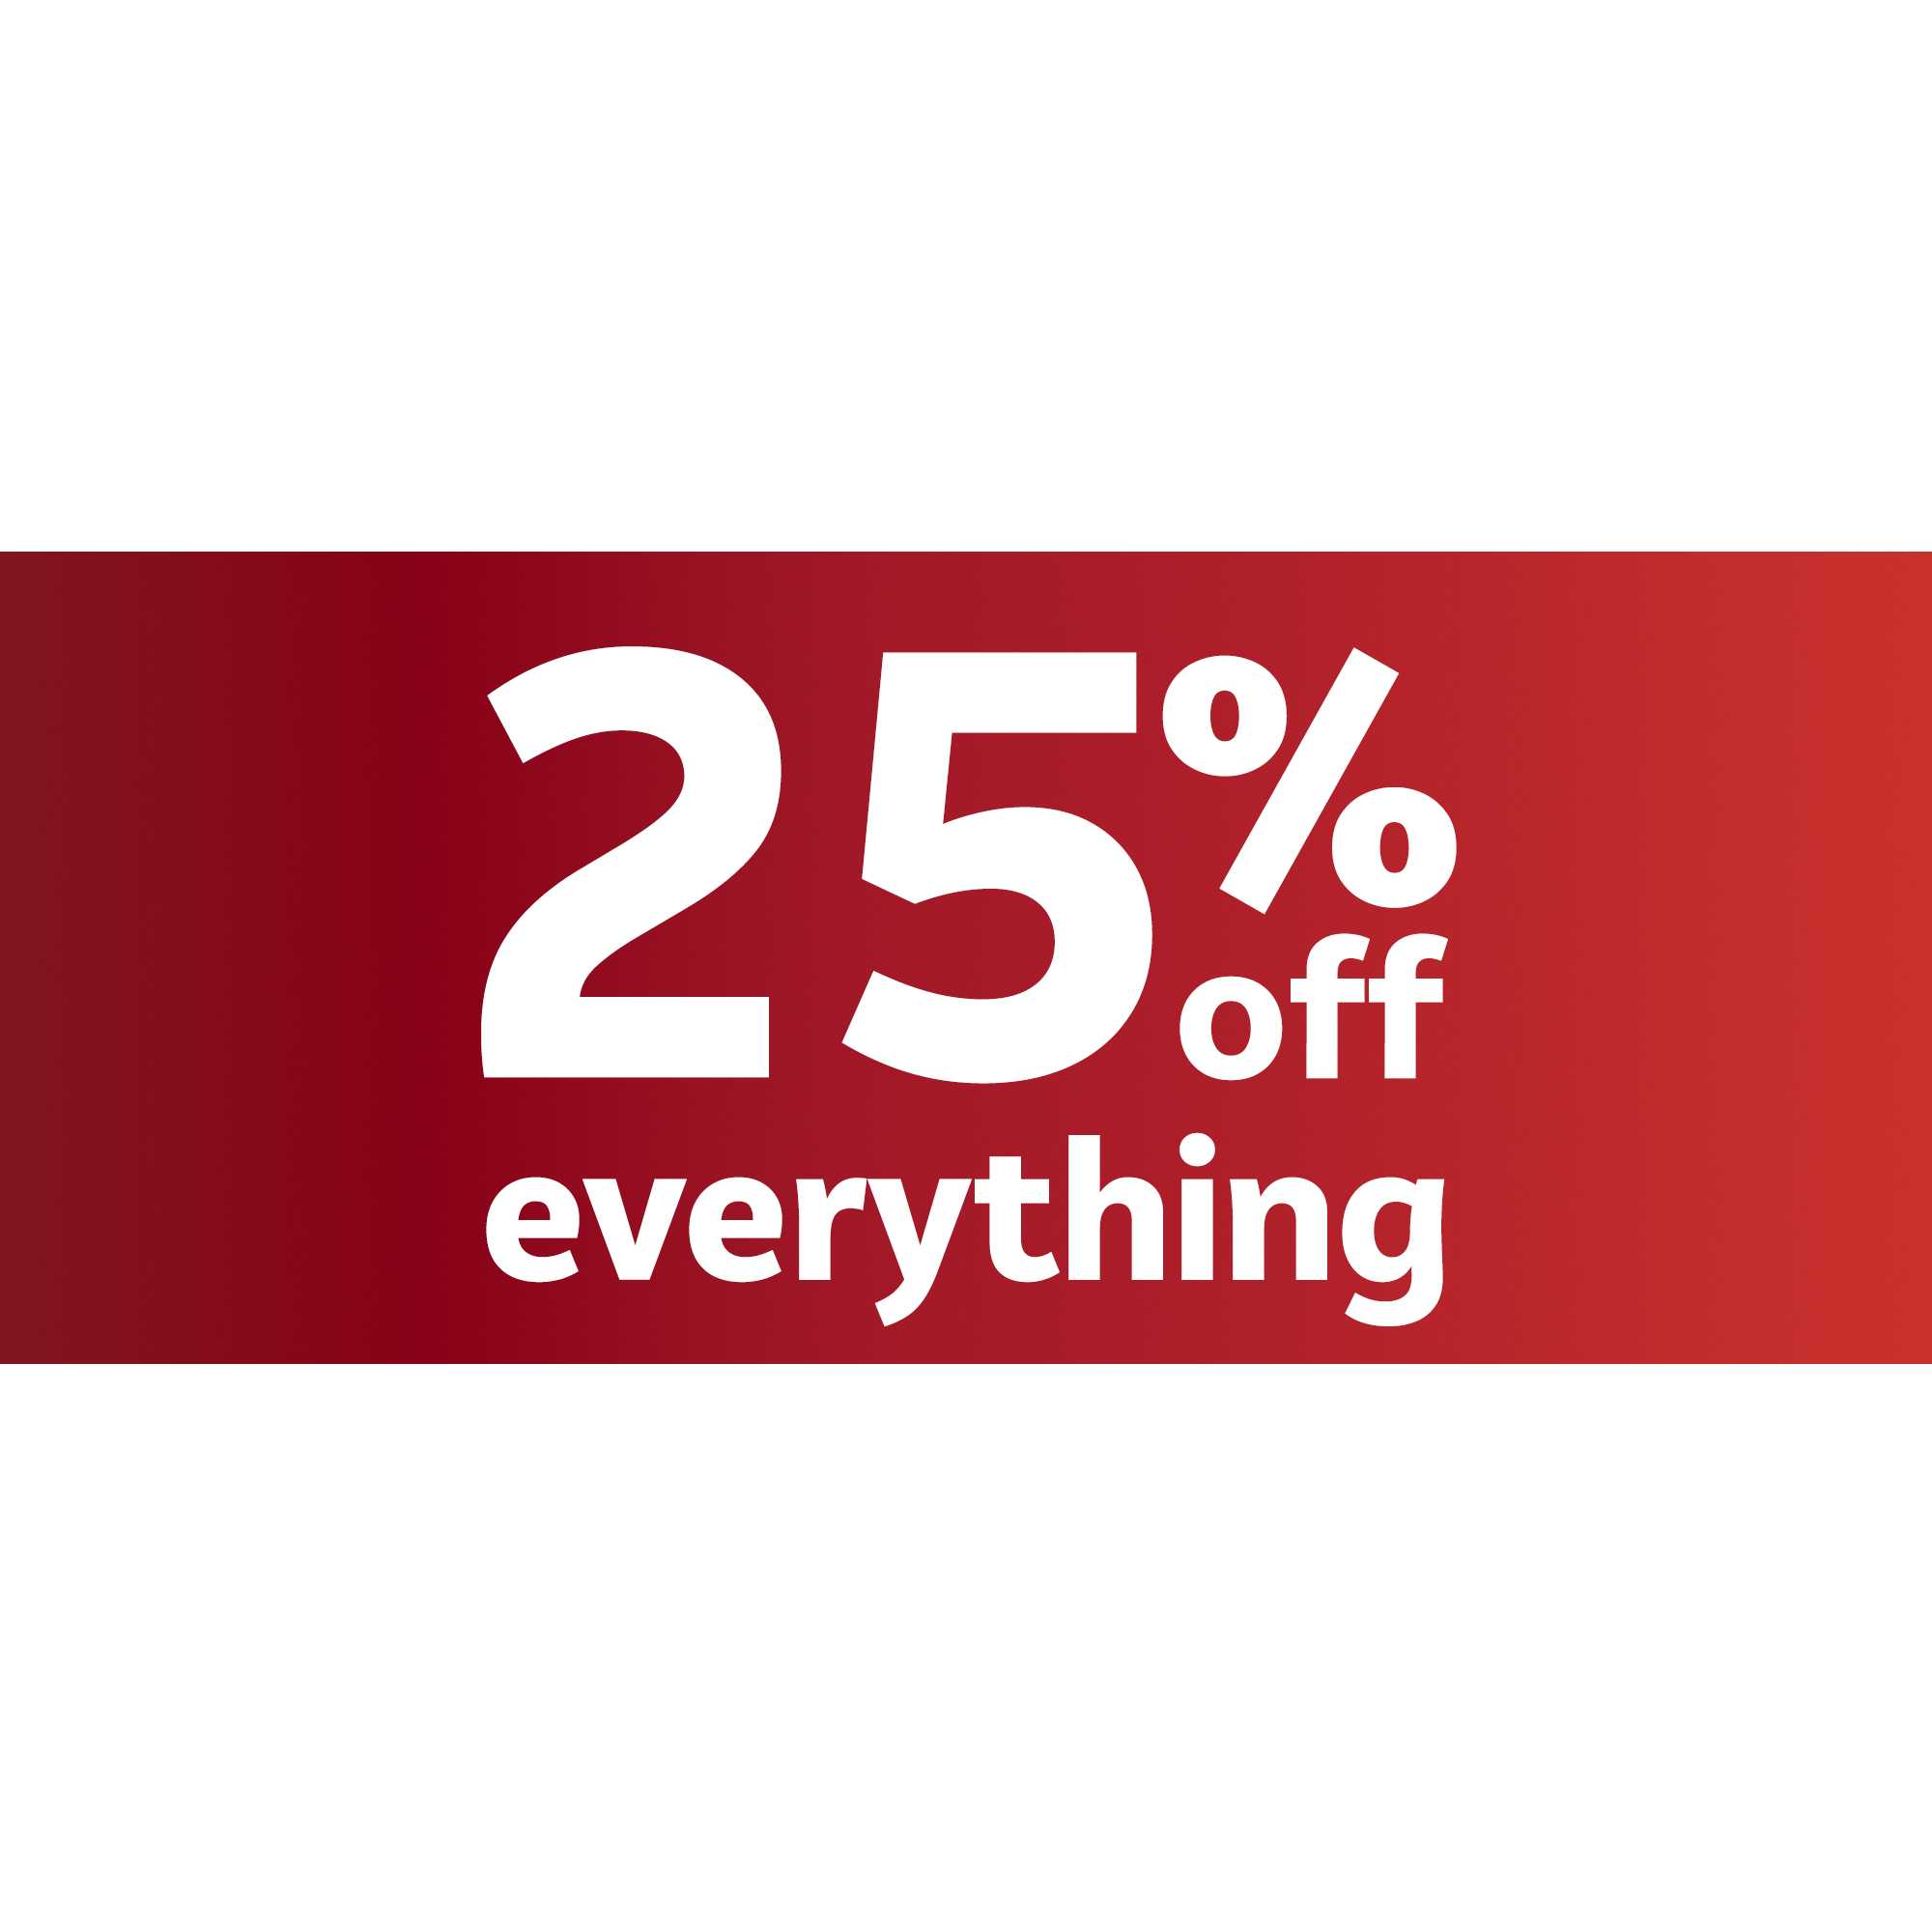 25% off everything. Ends 23:59 on 27 June. Online and in-store. T&Cs apply.